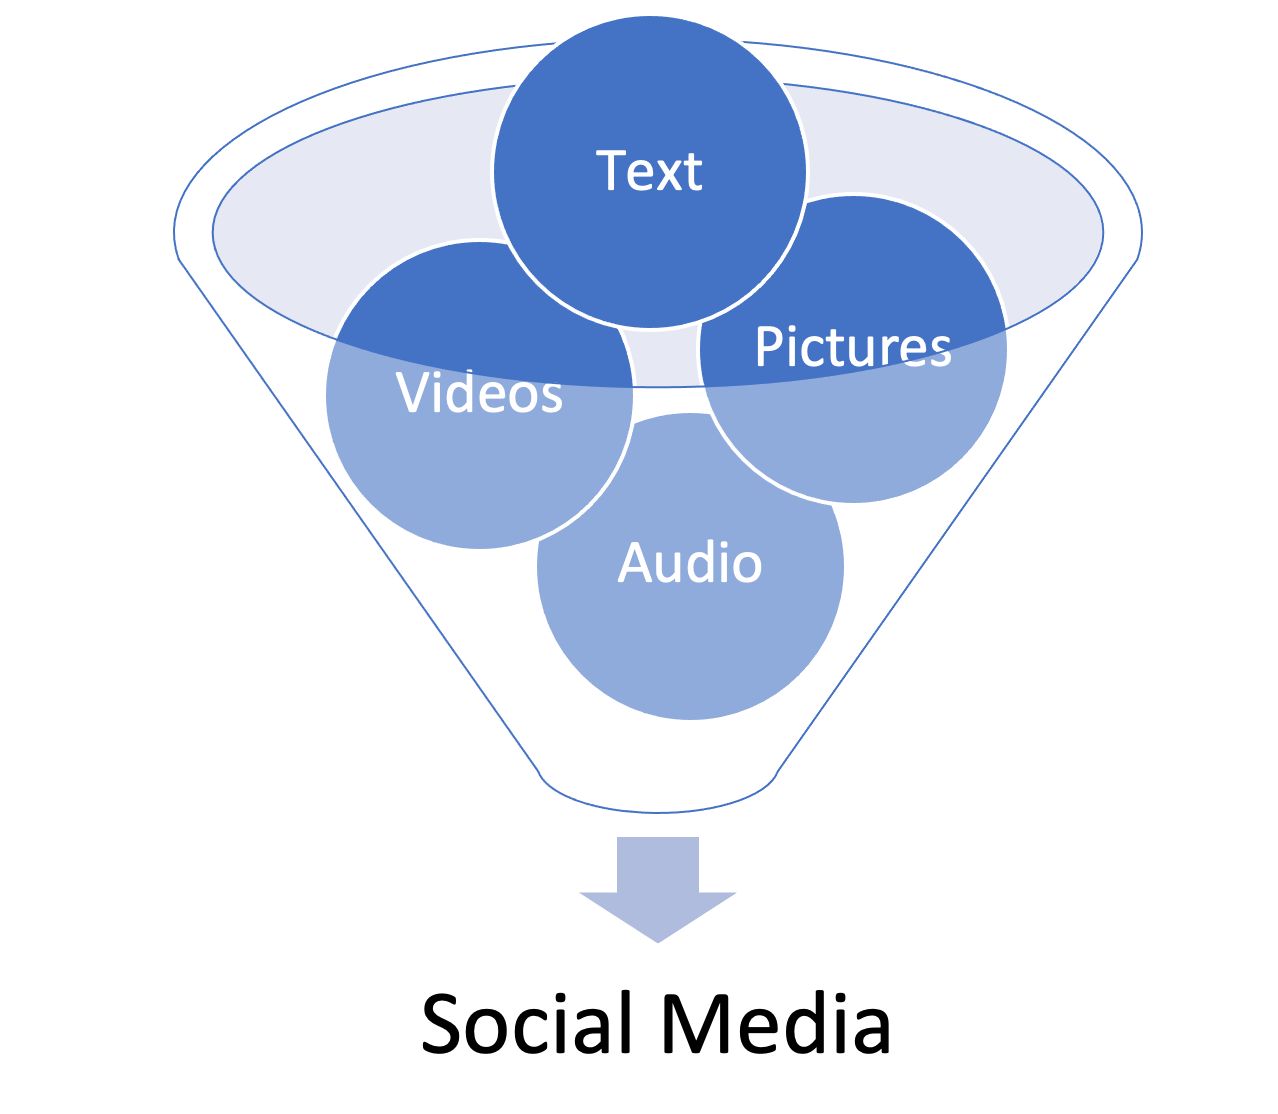 Social media platforms let users create and share pictures, videos, audio, and words online. This contributes to the interactive nature of such platforms.